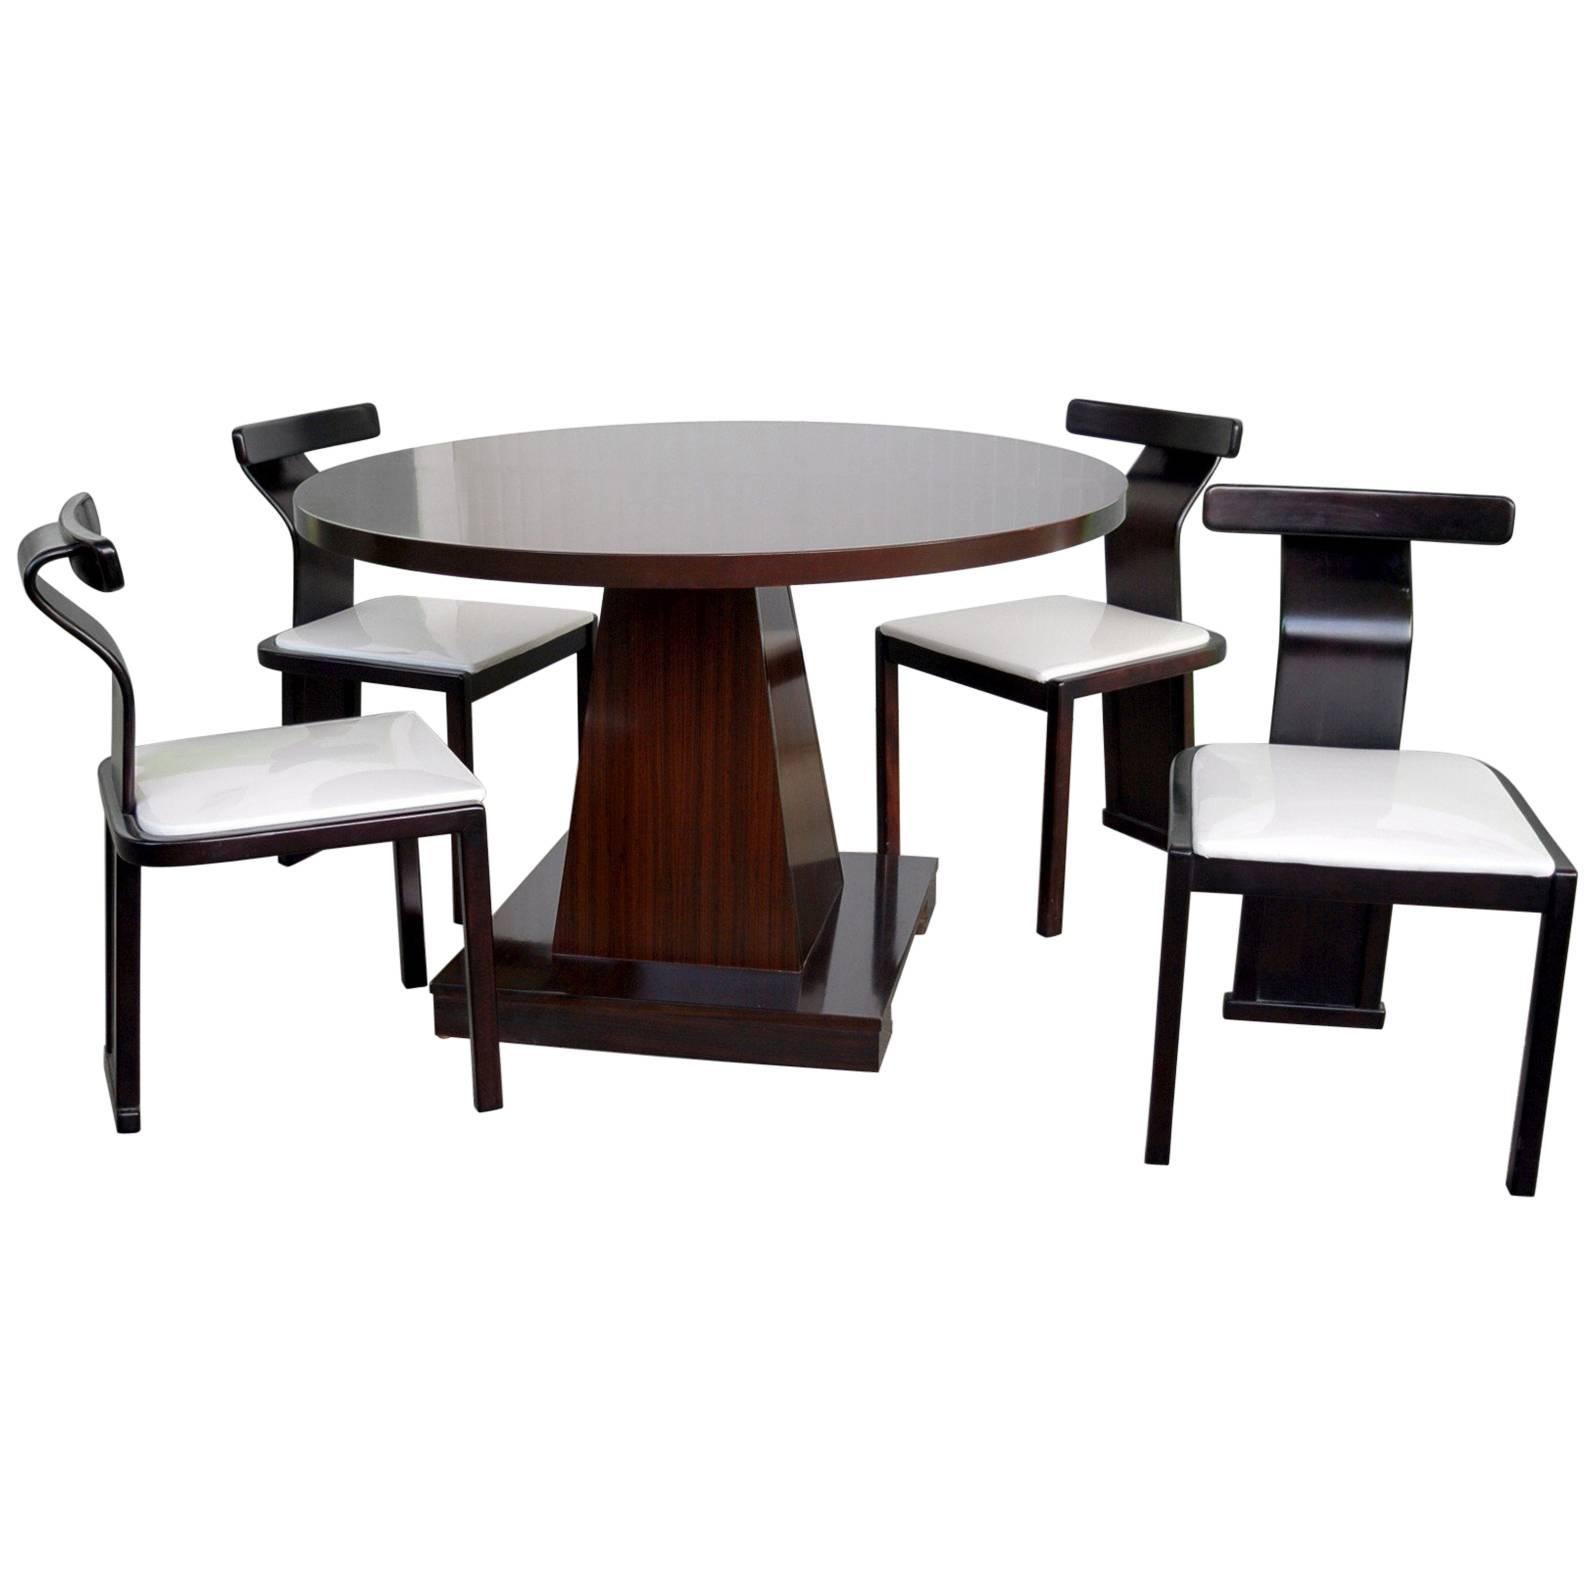 Four Chairs and Table Midcentury Set, Saporiti, Introini and Willy Rizzo Design